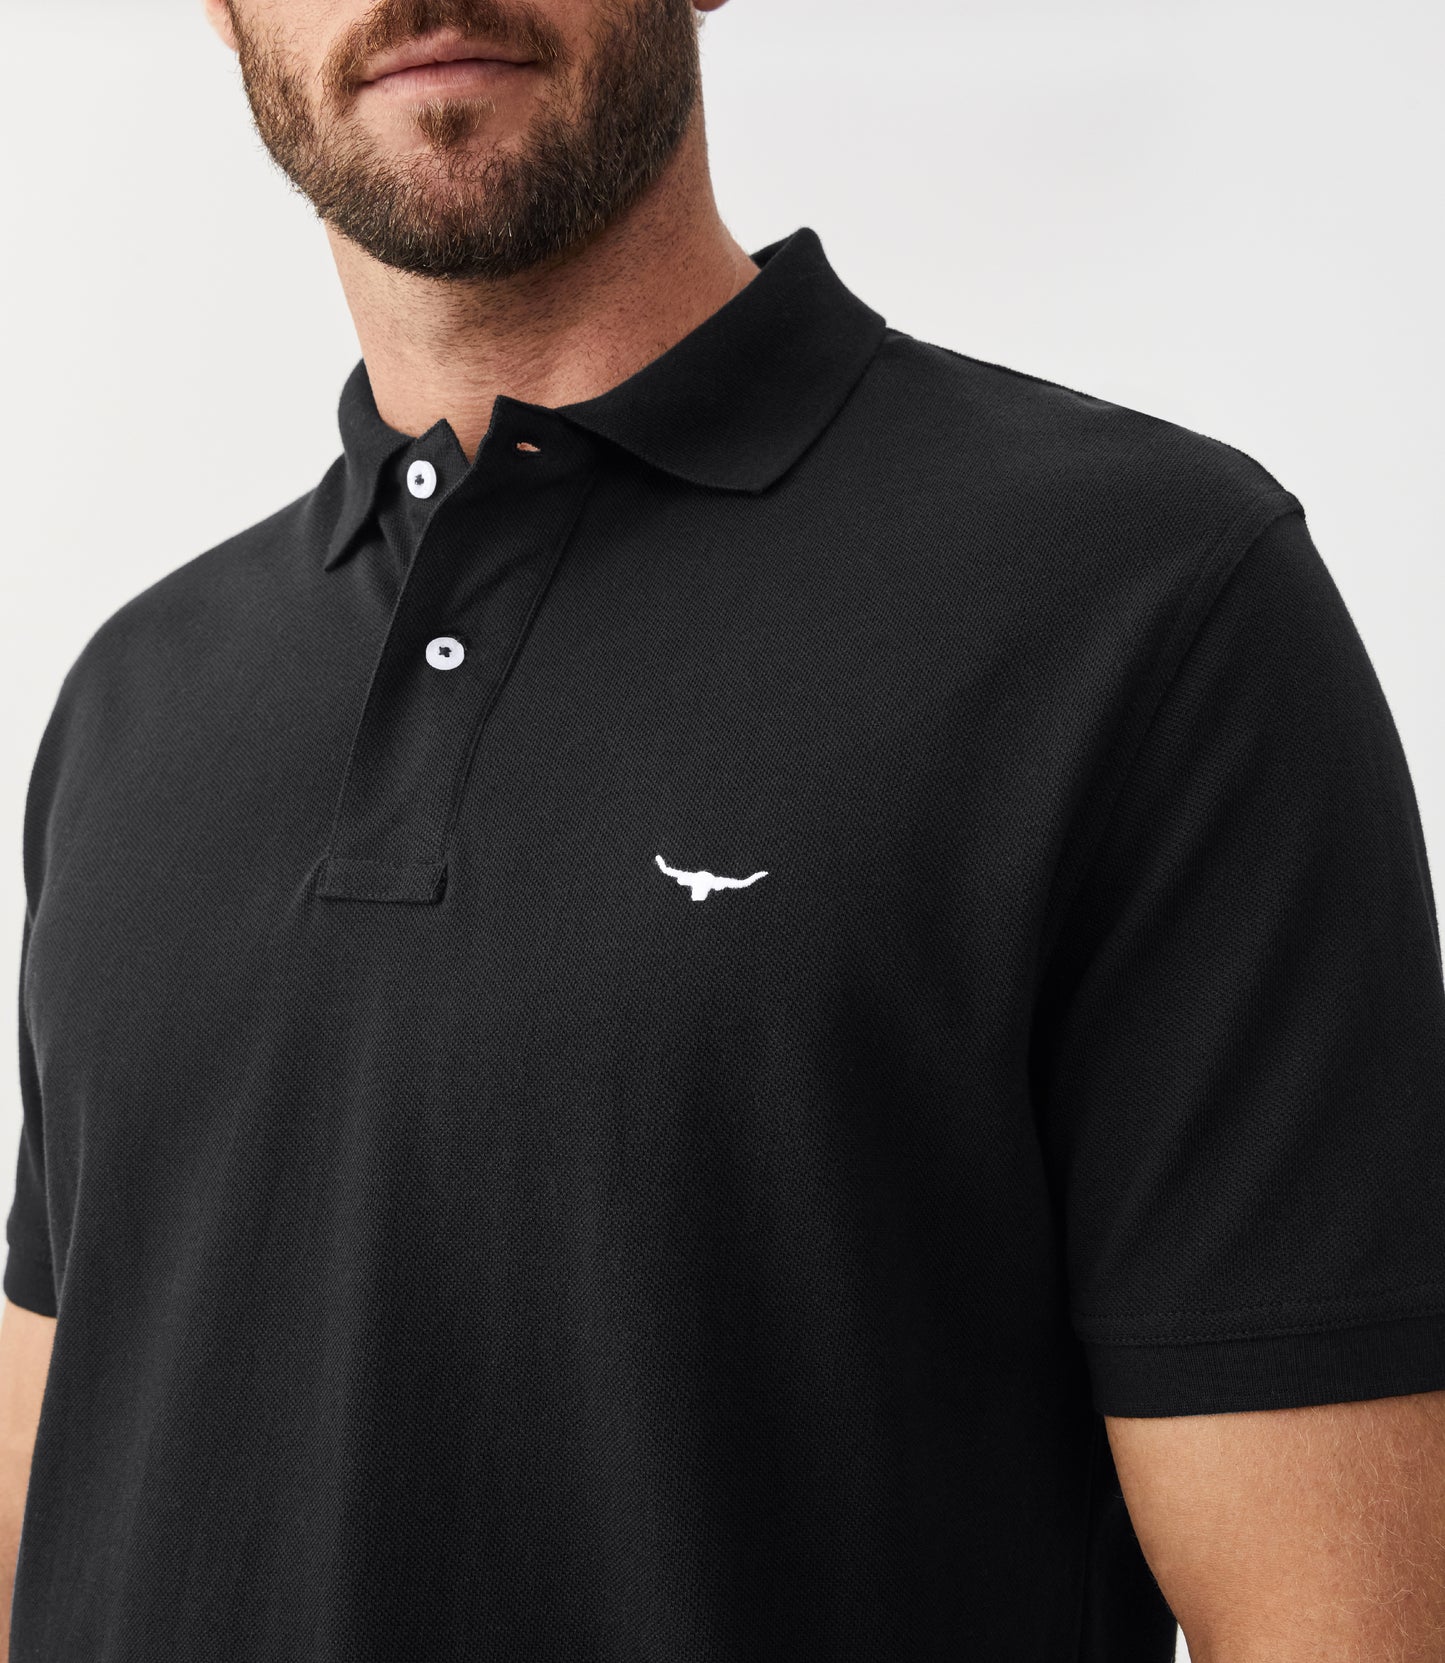 R.M Williams Polo Shirts, The Rod Polo in Black